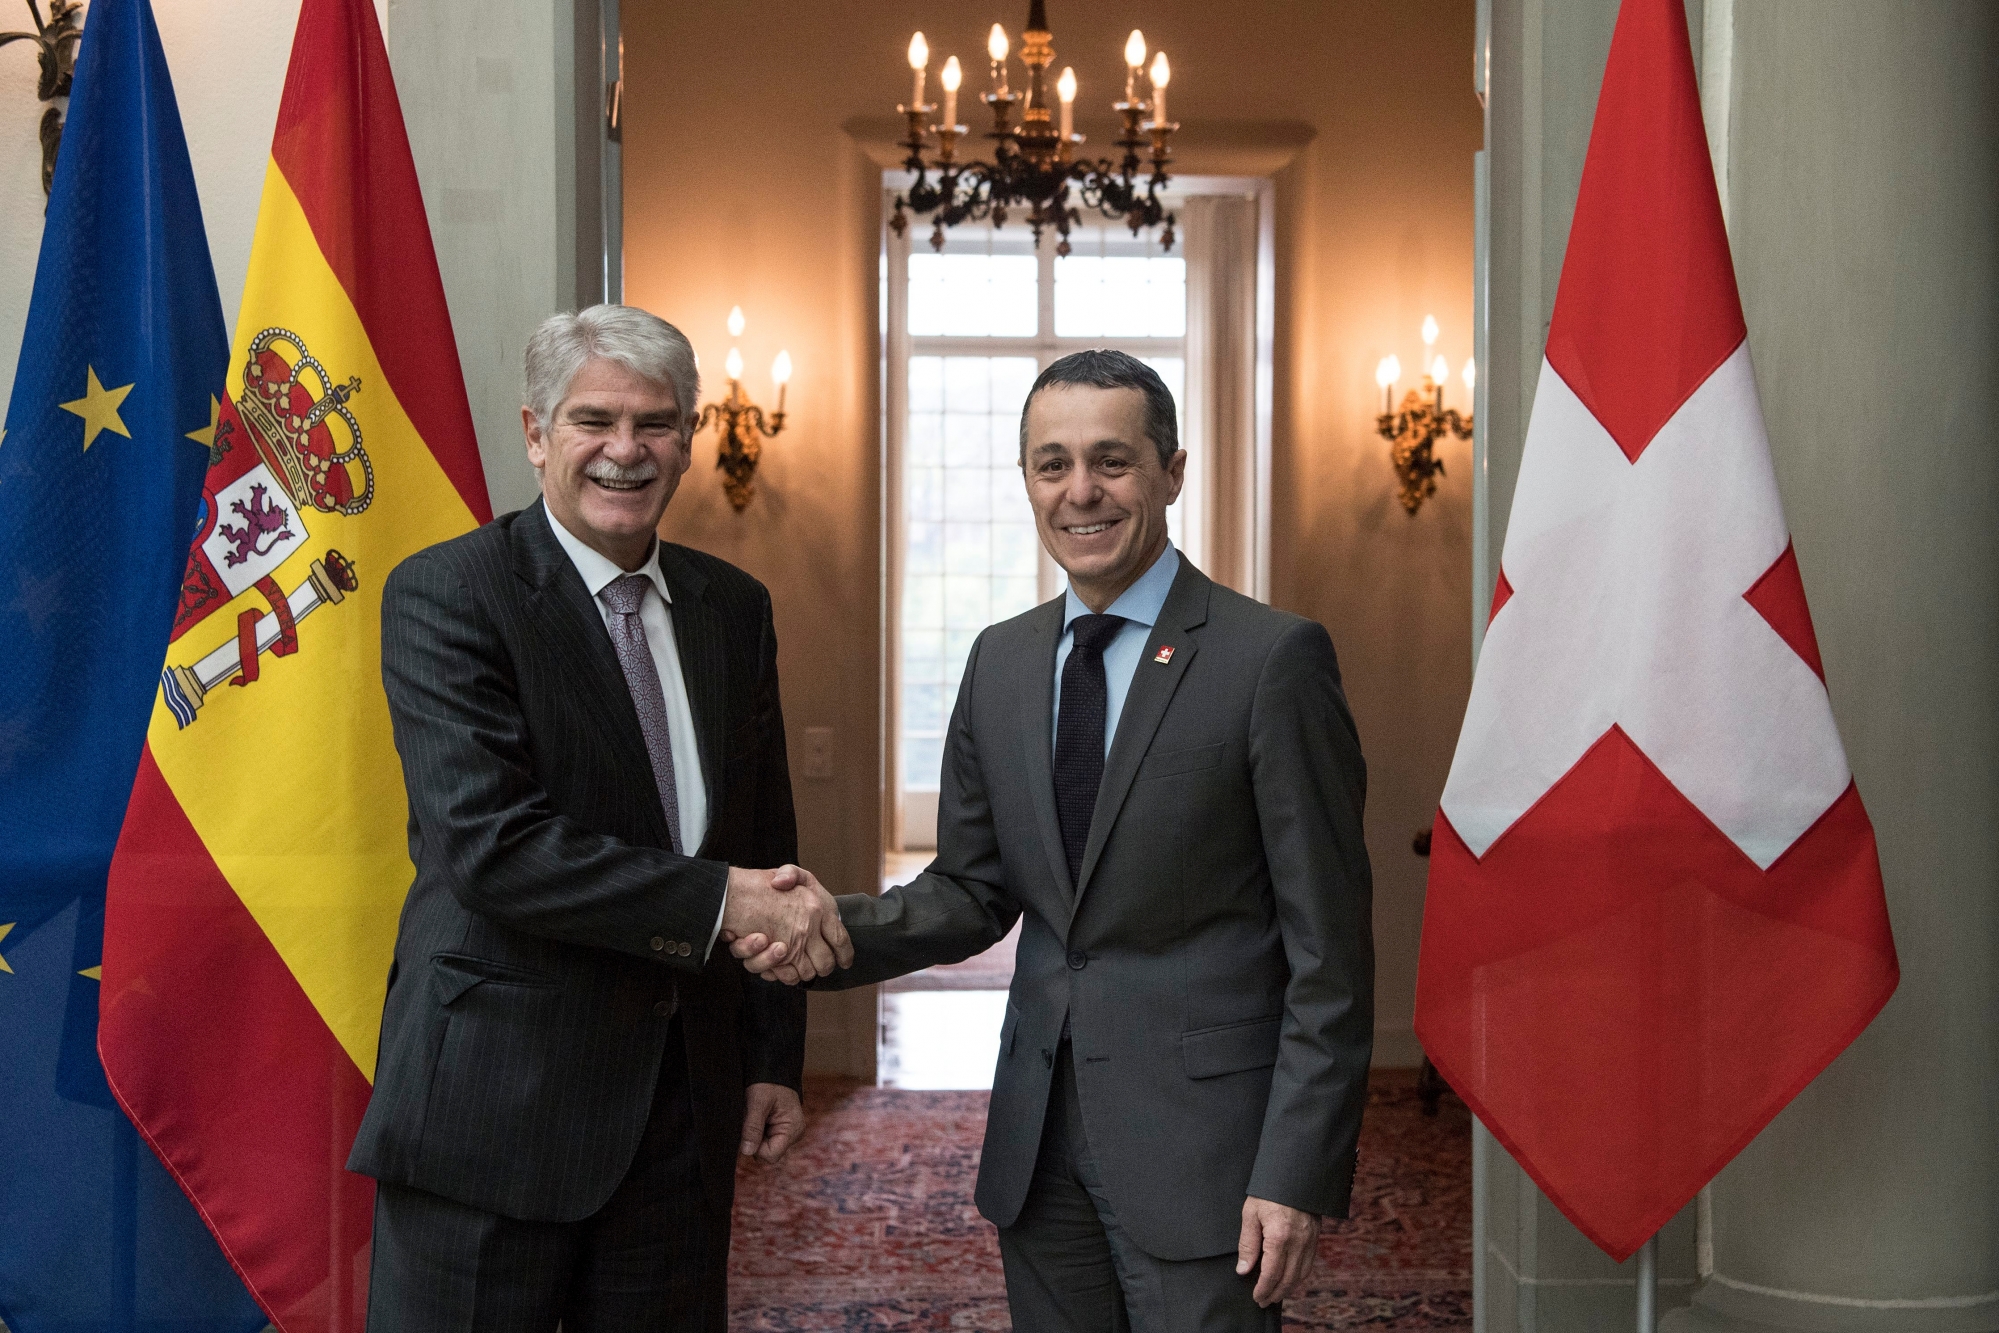 Swiss Federal Councillor Ignazio Cassis, right, welcomes Spanish Foreign Minister Alfonso Maria Dastis Quecedo on Monday, April 23, 2018, in Bern, Switzerland. Dastis Quecedo is on an official working visit in Switzerland. (KEYSTONE/Peter Schneider) SWITZERLAND VISIT SPAIN DIPLOMACY